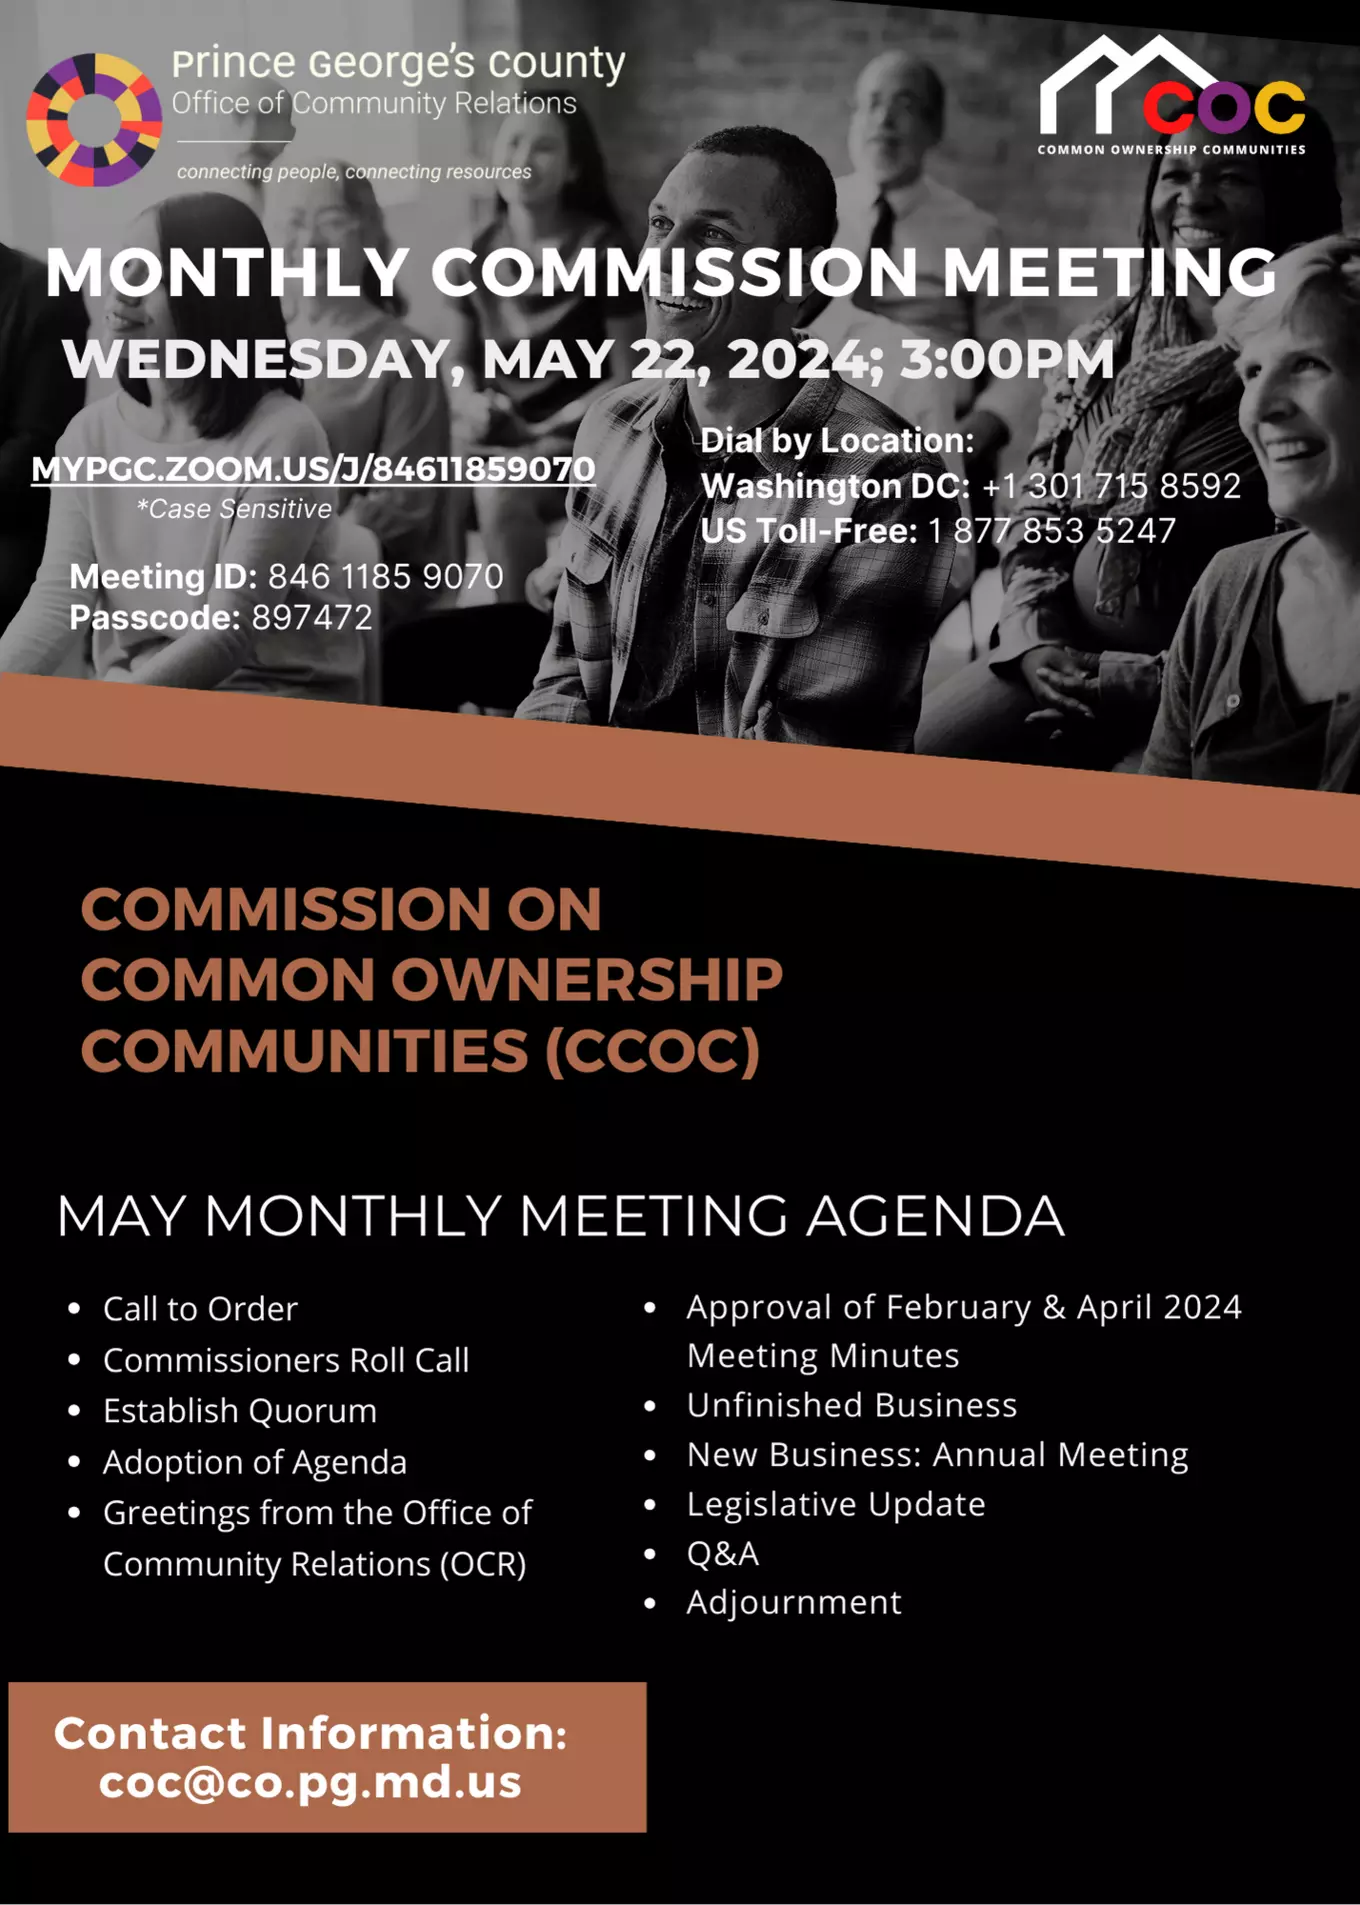 The Prince George’s County Office of Community Relations on Wednesday, May 22nd, 2024, at 3:00 pm will partner with the Commission on Common Ownership Communities to host a virtual meeting.